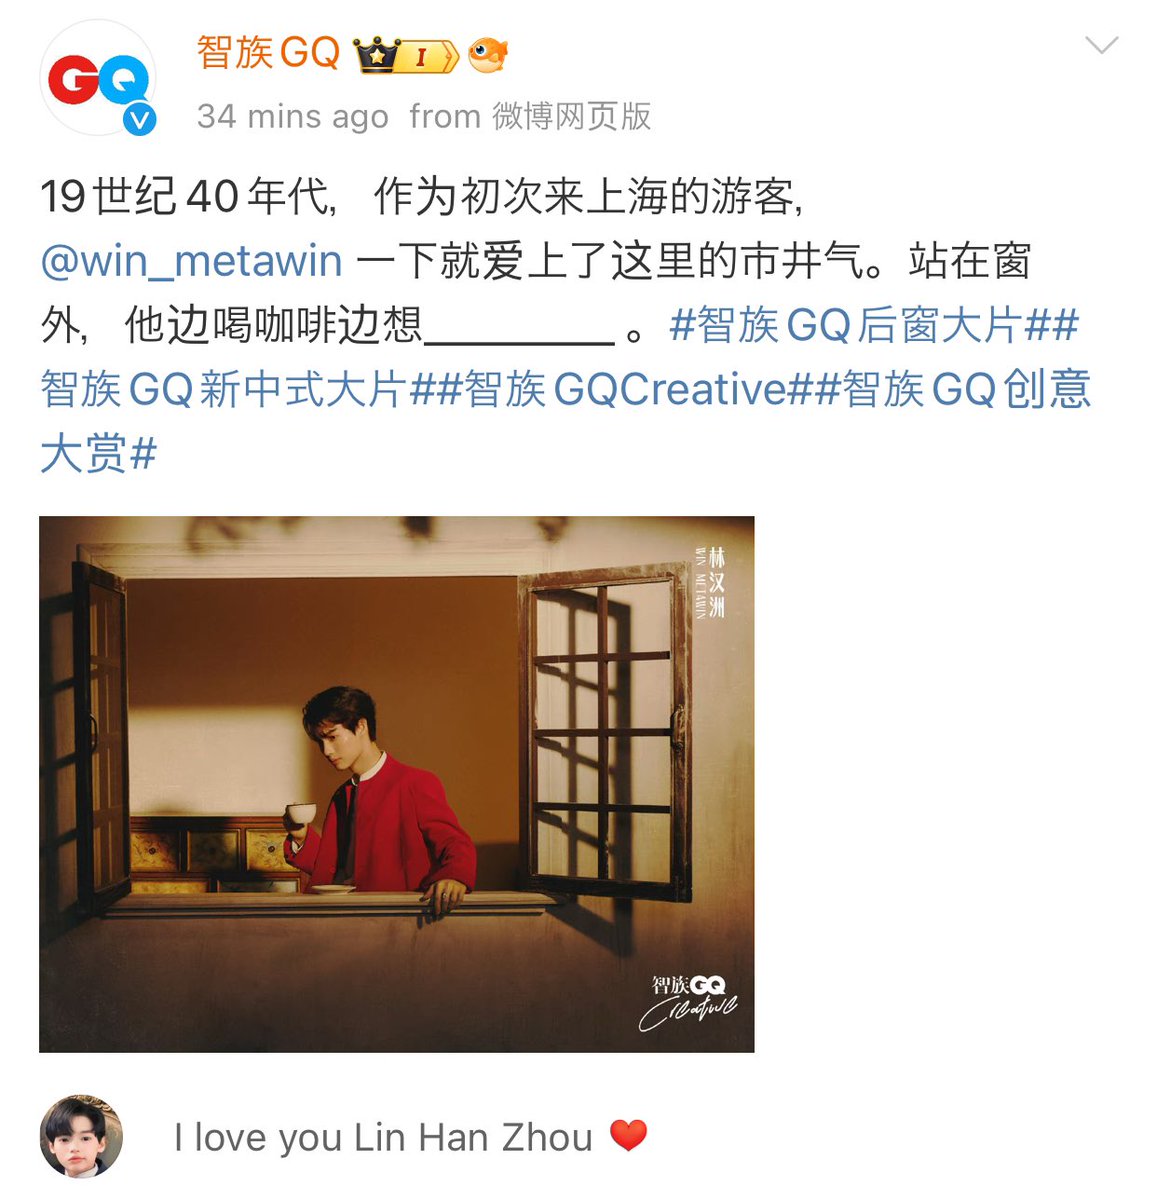 *traveling back 184 years ago 

“In 1840s, as a first-time visitor to Shanghai, @winmetawin immediately fell in love with the city’s vibe. Standing by the window, he sipped his coffee and thought about ______ .”

🔗 m.weibo.cn/status/5040478…

#智族GQ后窗大片 #智族GQ新中式大片